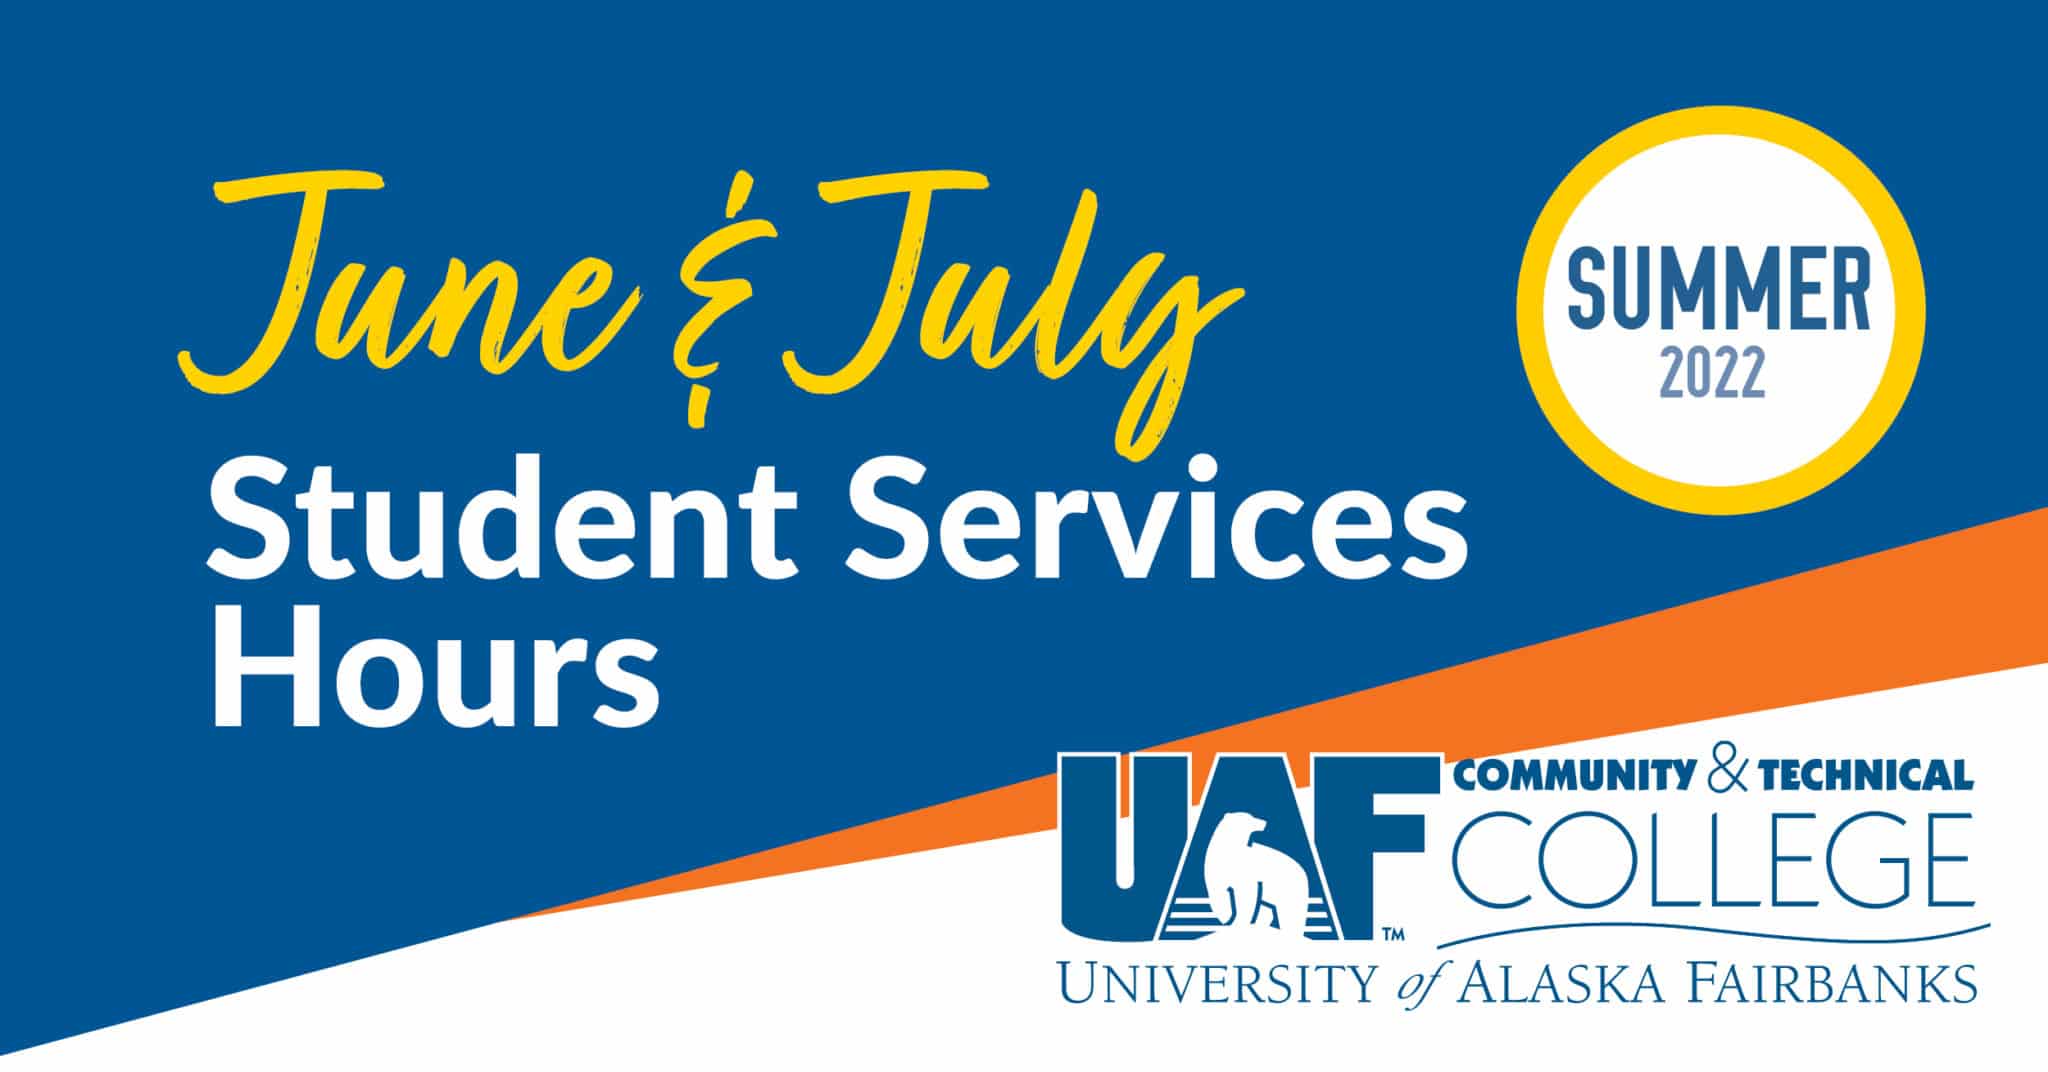 CTC Summer 2022 hours June and July UAF Community & Technical College